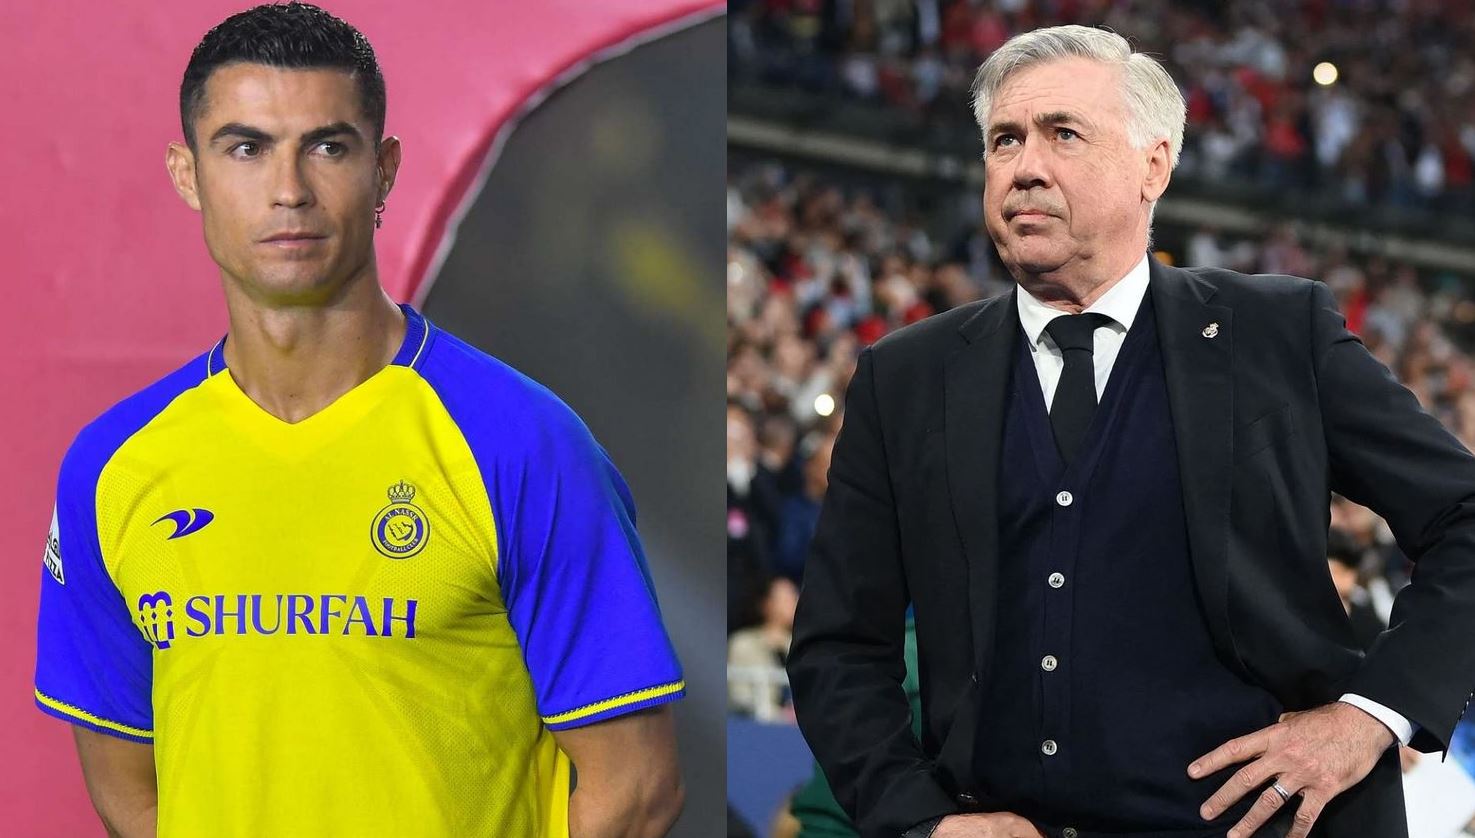 The Real Madrid coach alludes to Ronaldo’s mistake…and talks about the fate of Benzema and Modric